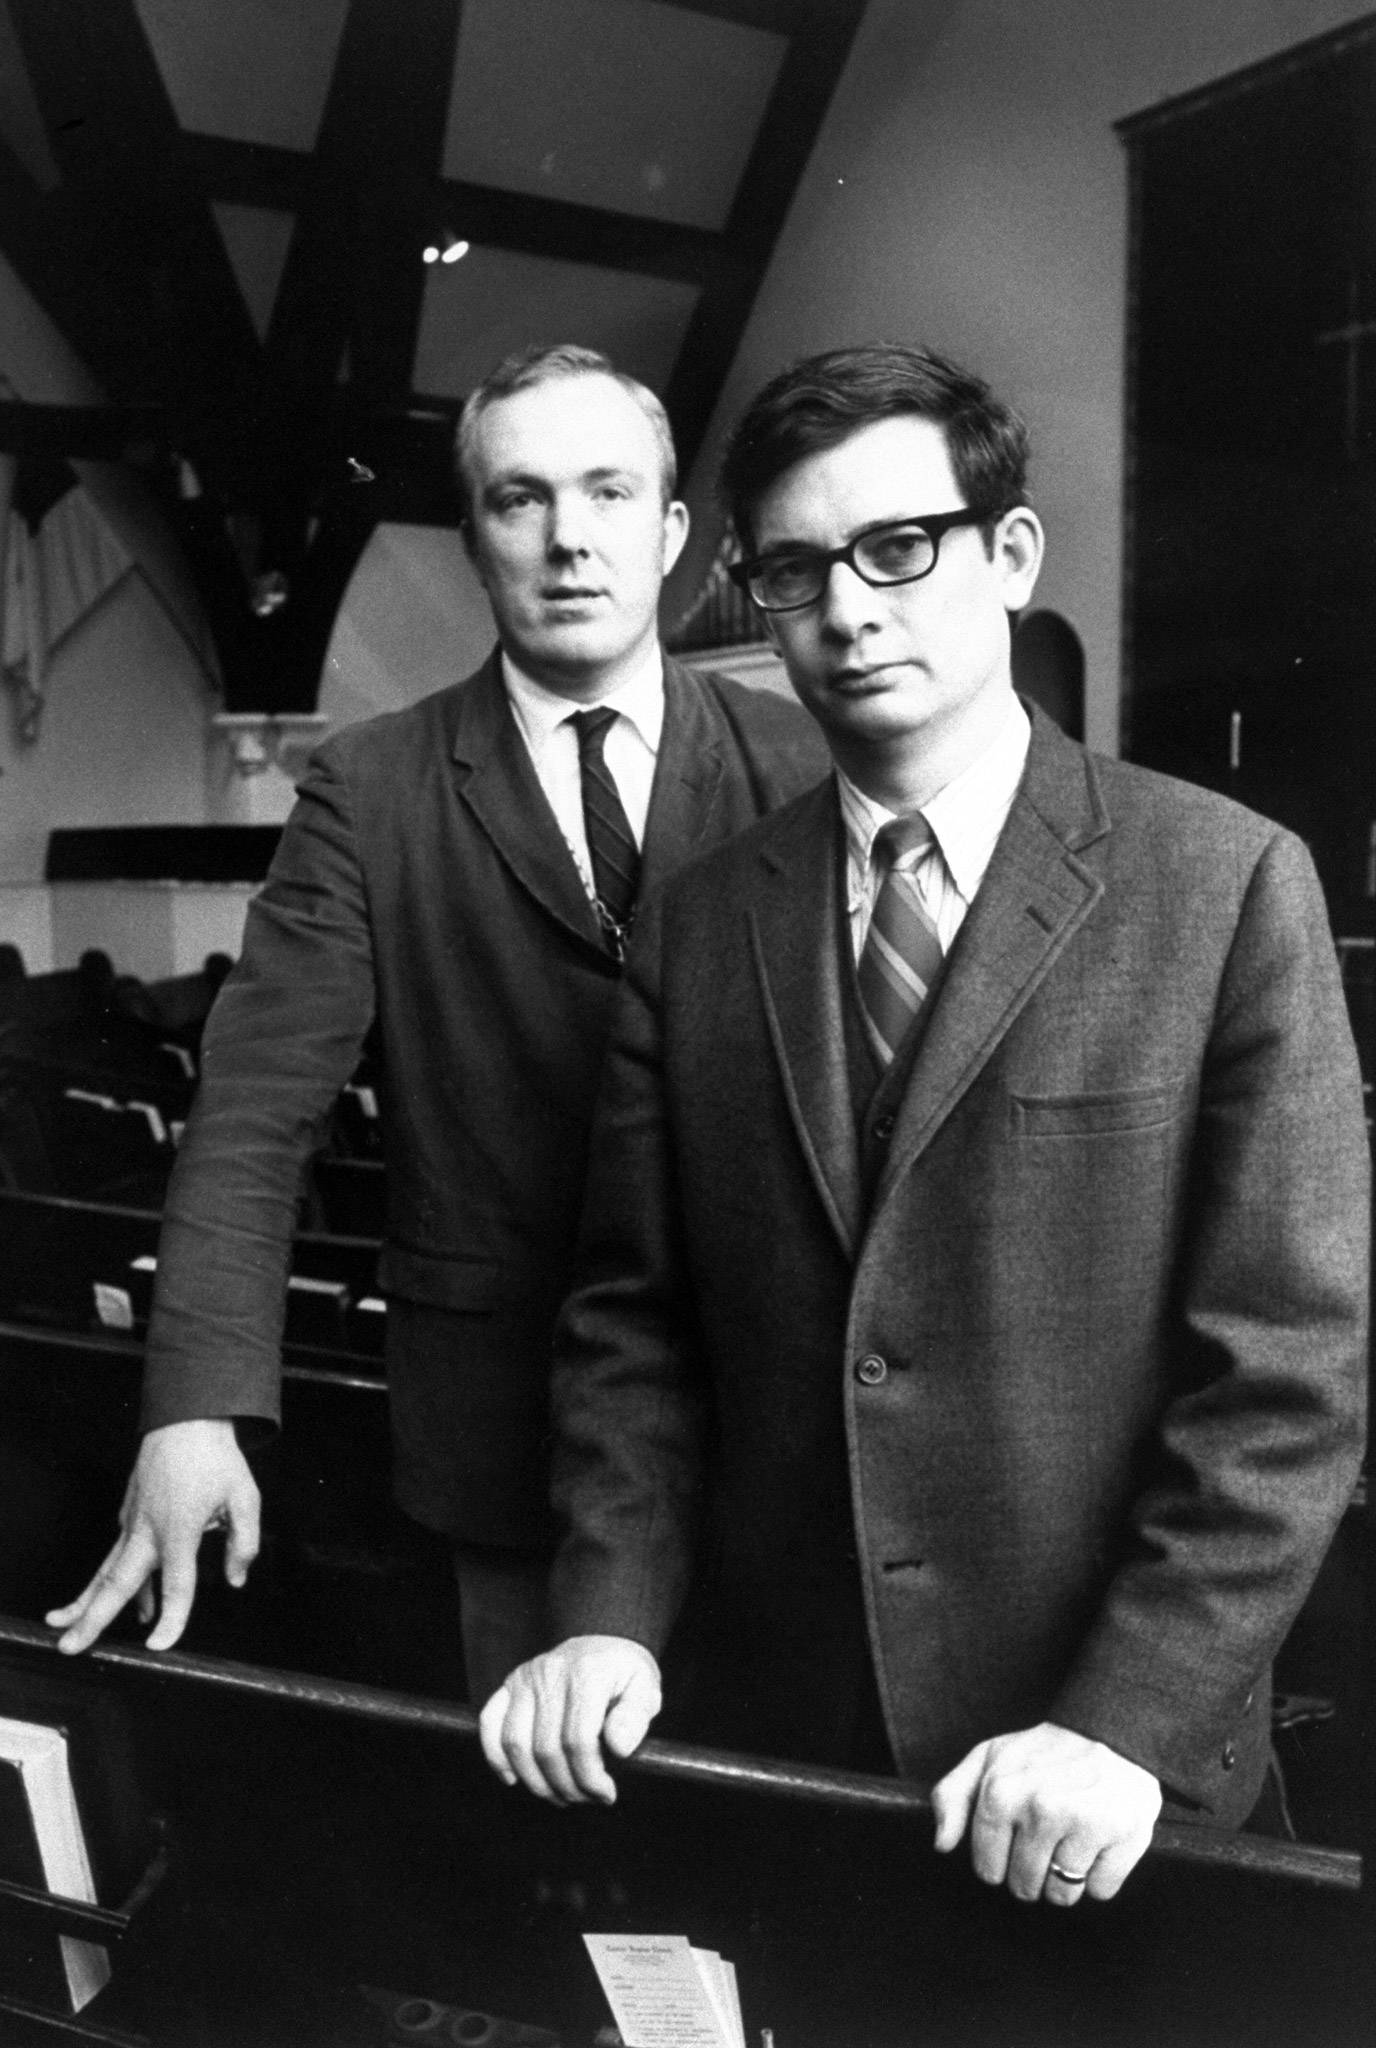 Pennsylvania ministers Allen Hinand and Ronald Lutz are part of Philadelphia's Clergy Consultation Service, which in 1970 advised 40 women a week on both legal (local hospital) and extralegal, out-of-state-abortions. (Alfred Eisenstaedt—The LIFE Picture Collection/Getty Images)